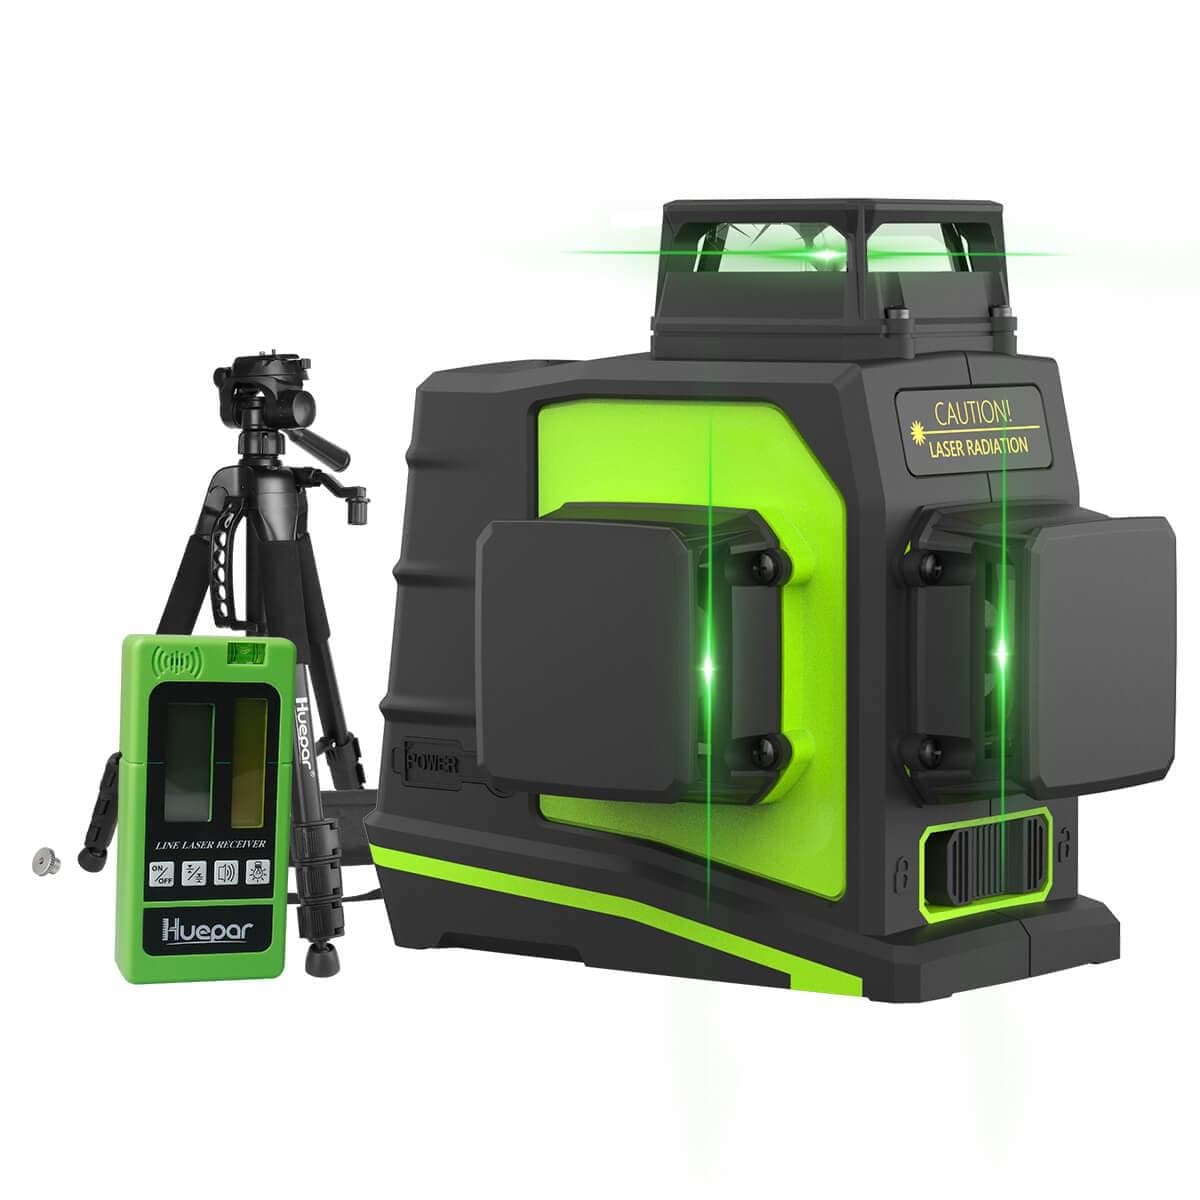 Huepar Self-Leveling Laser Level Green Beam Cross Line Laser Level Tools  with 2 Plumb Dots and 360° Magnetic Pivoting Bracket 7211CG 